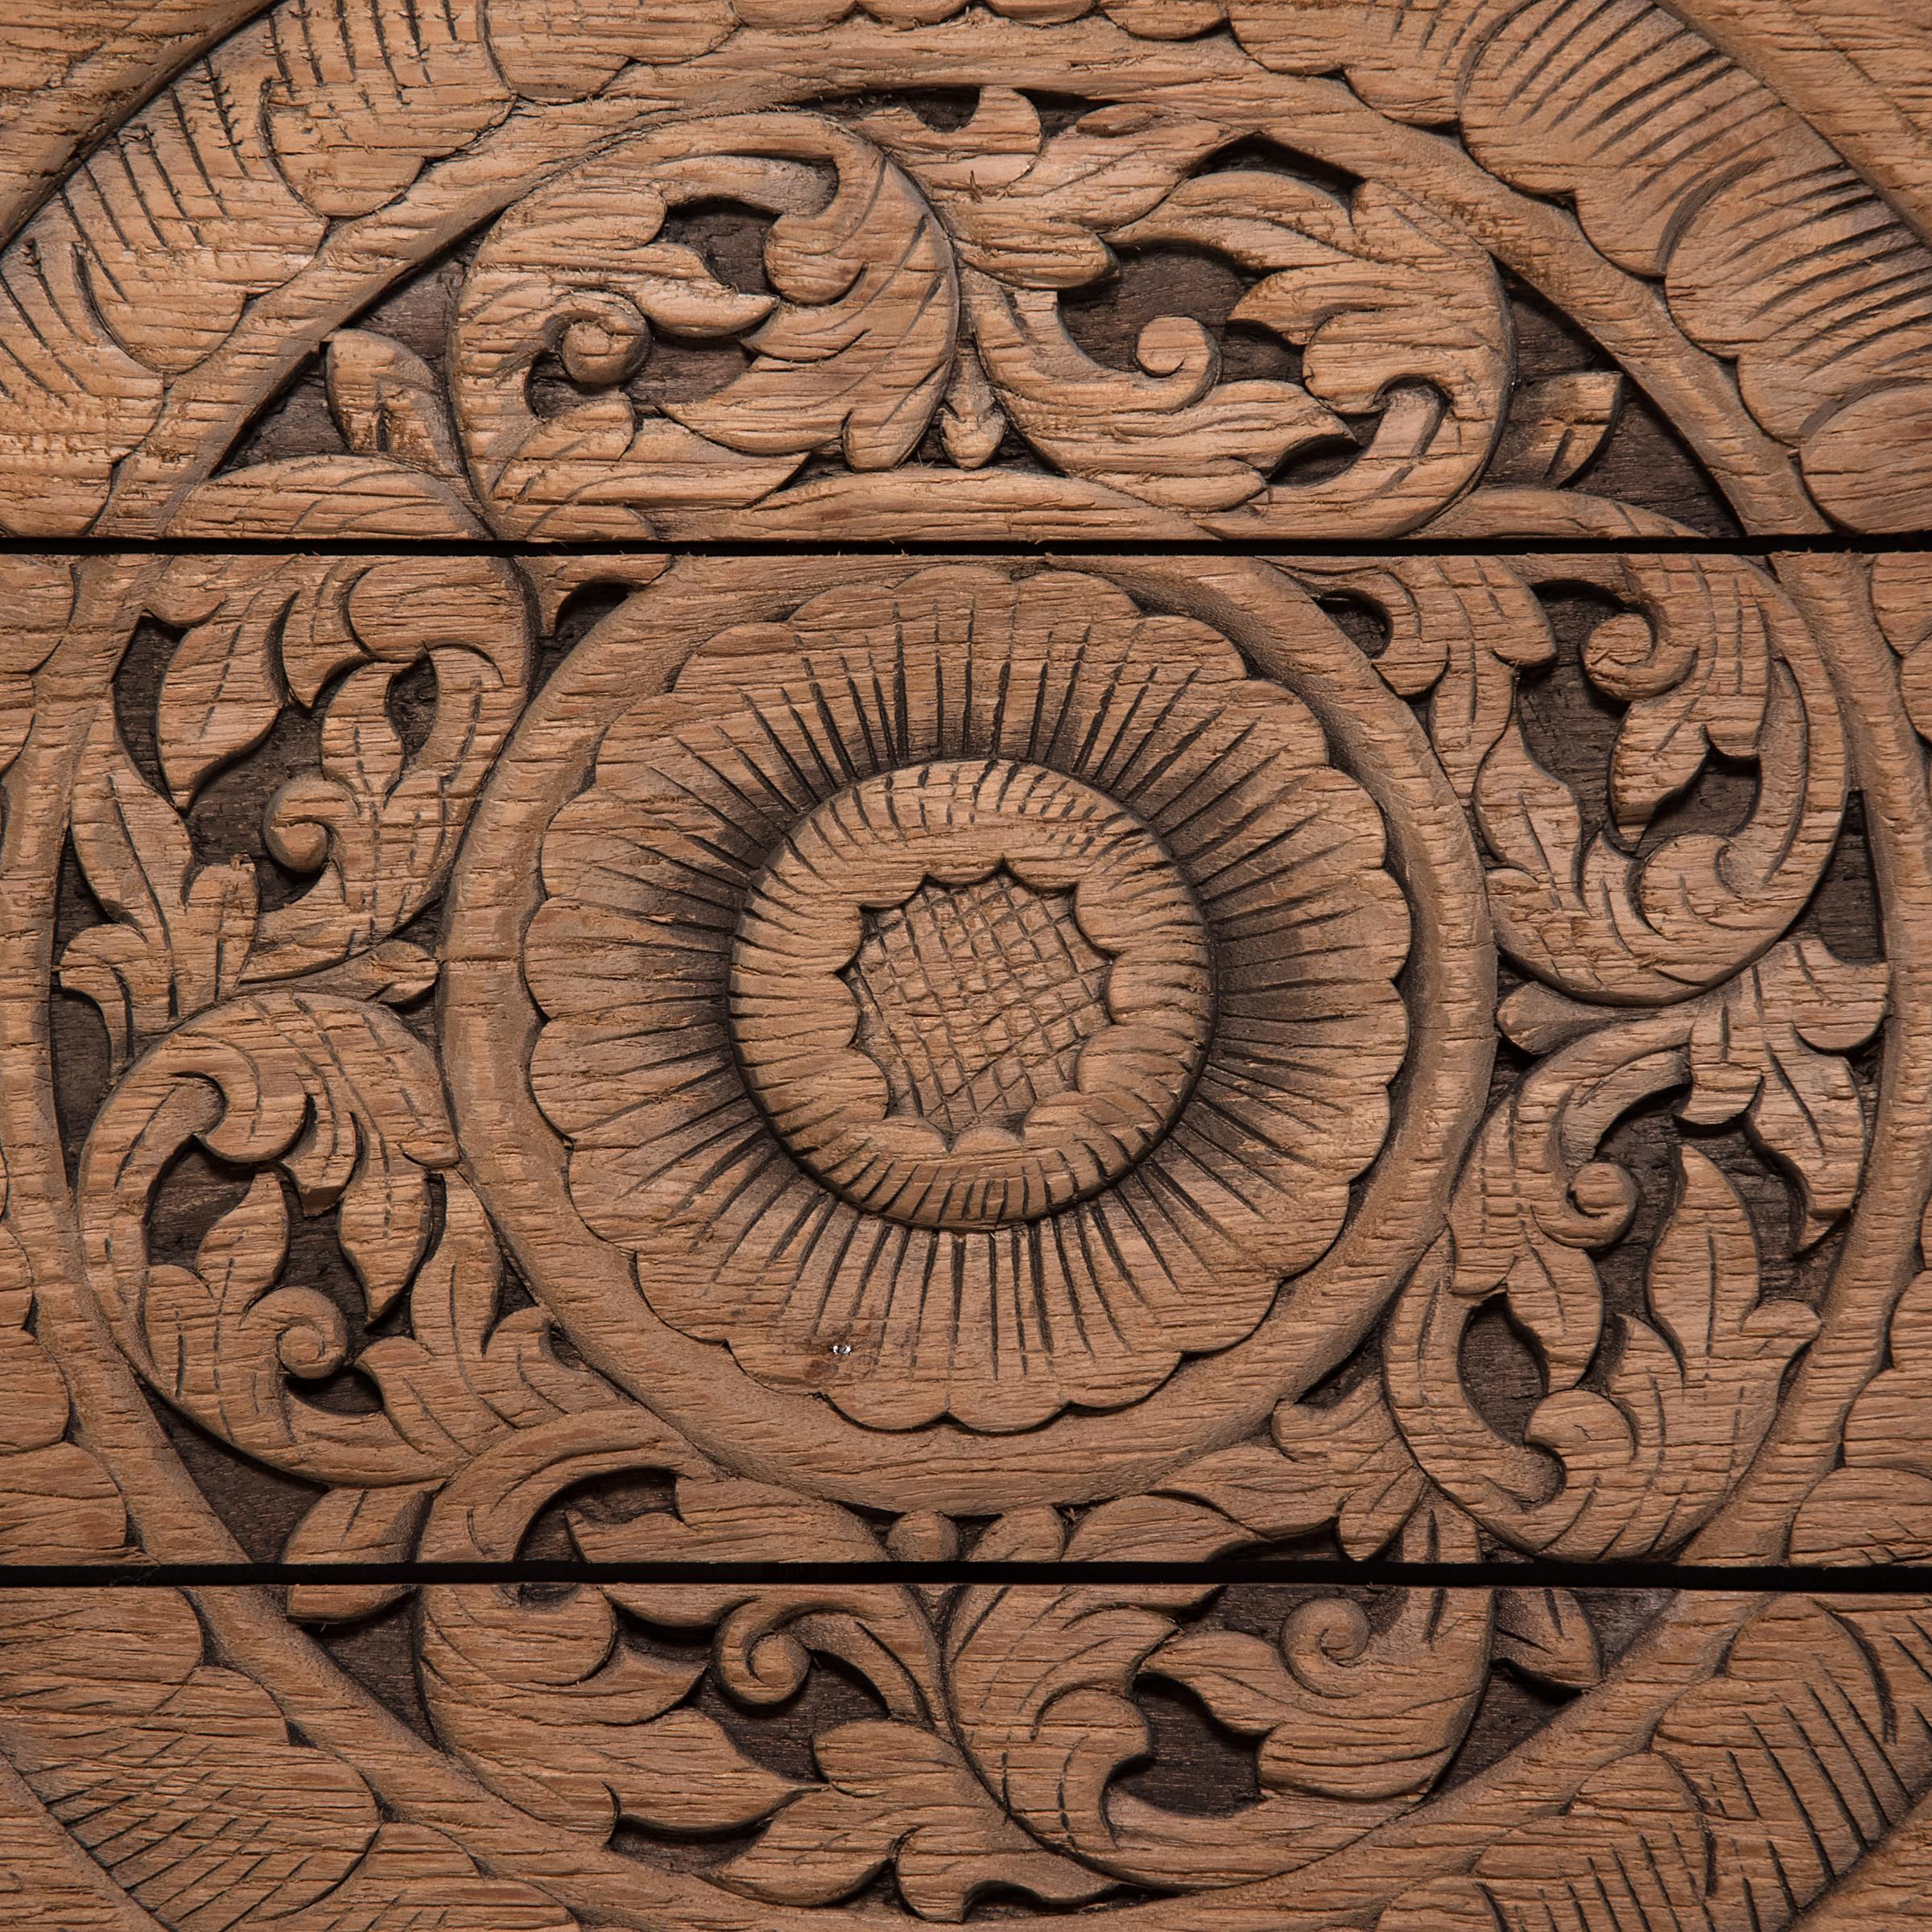 Worked from reclaimed teak boards, this large, seven-board panel is hand-carved in relief with a decorative mandala design in the style of Thai or Balinese fretwork screens. Concentric circles with floral motifs radiate from a central lotus blossom,